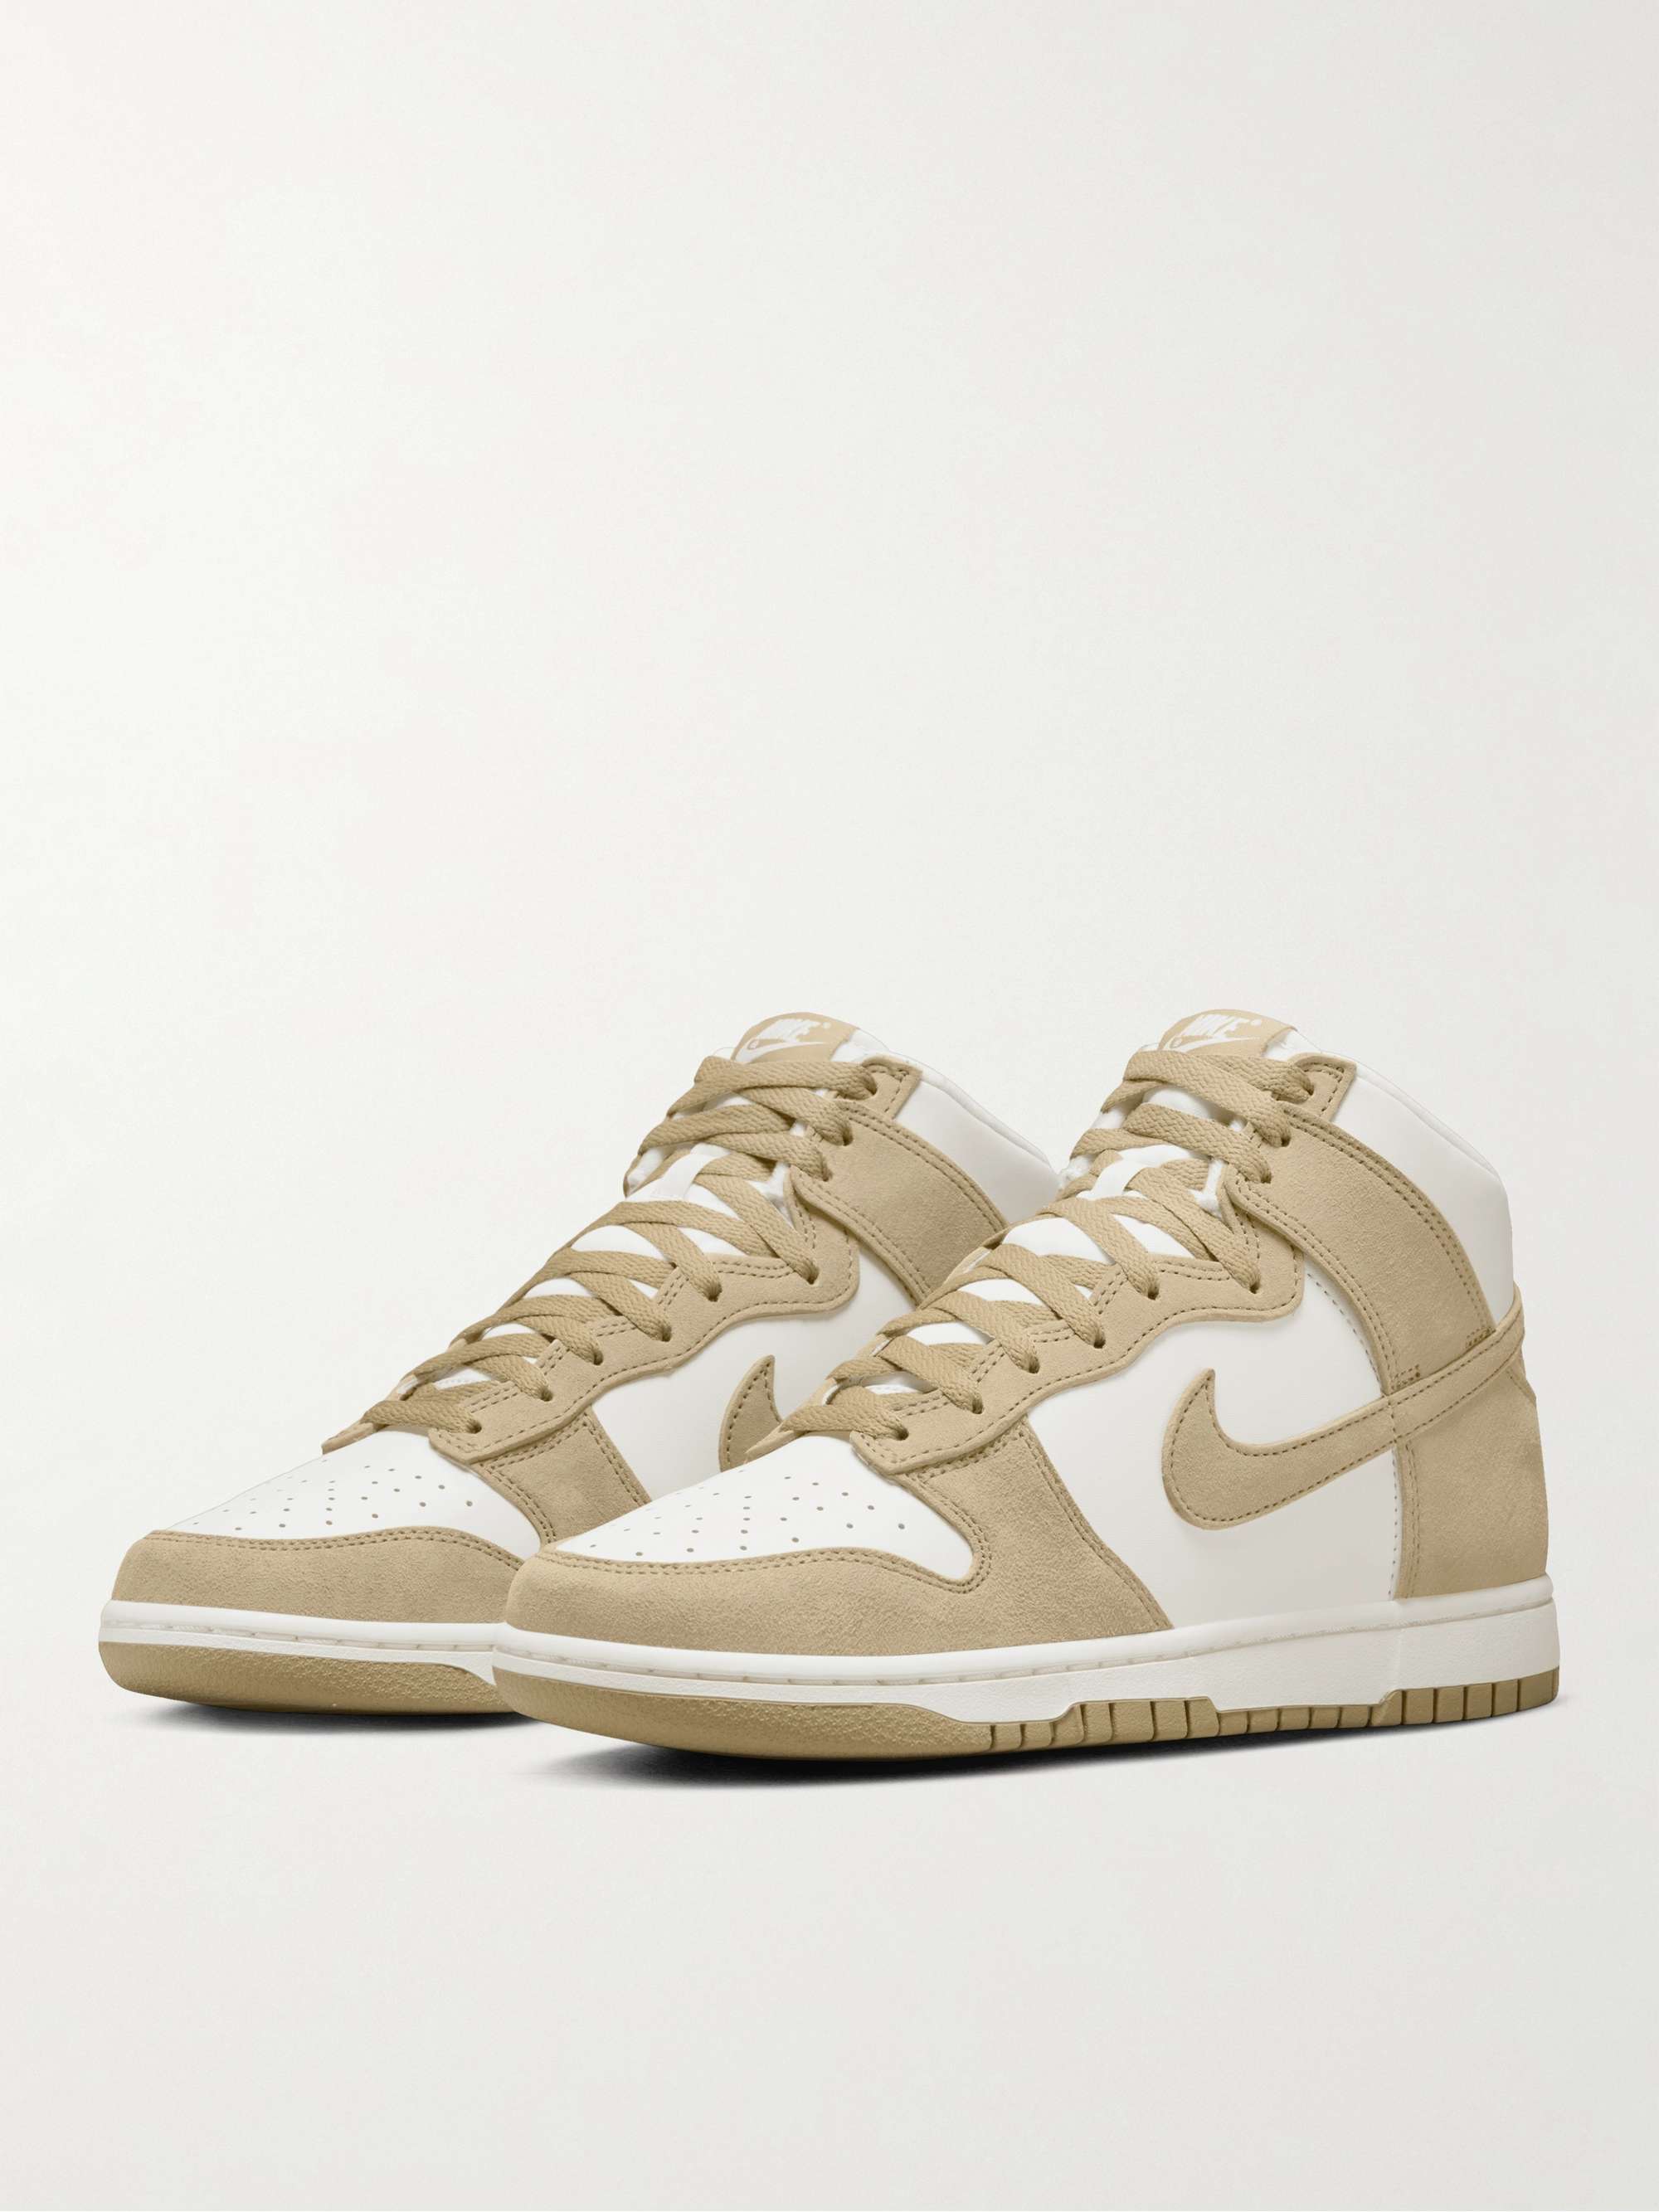 NIKE Dunk High Retro Leather and Suede Sneakers for Men | MR PORTER